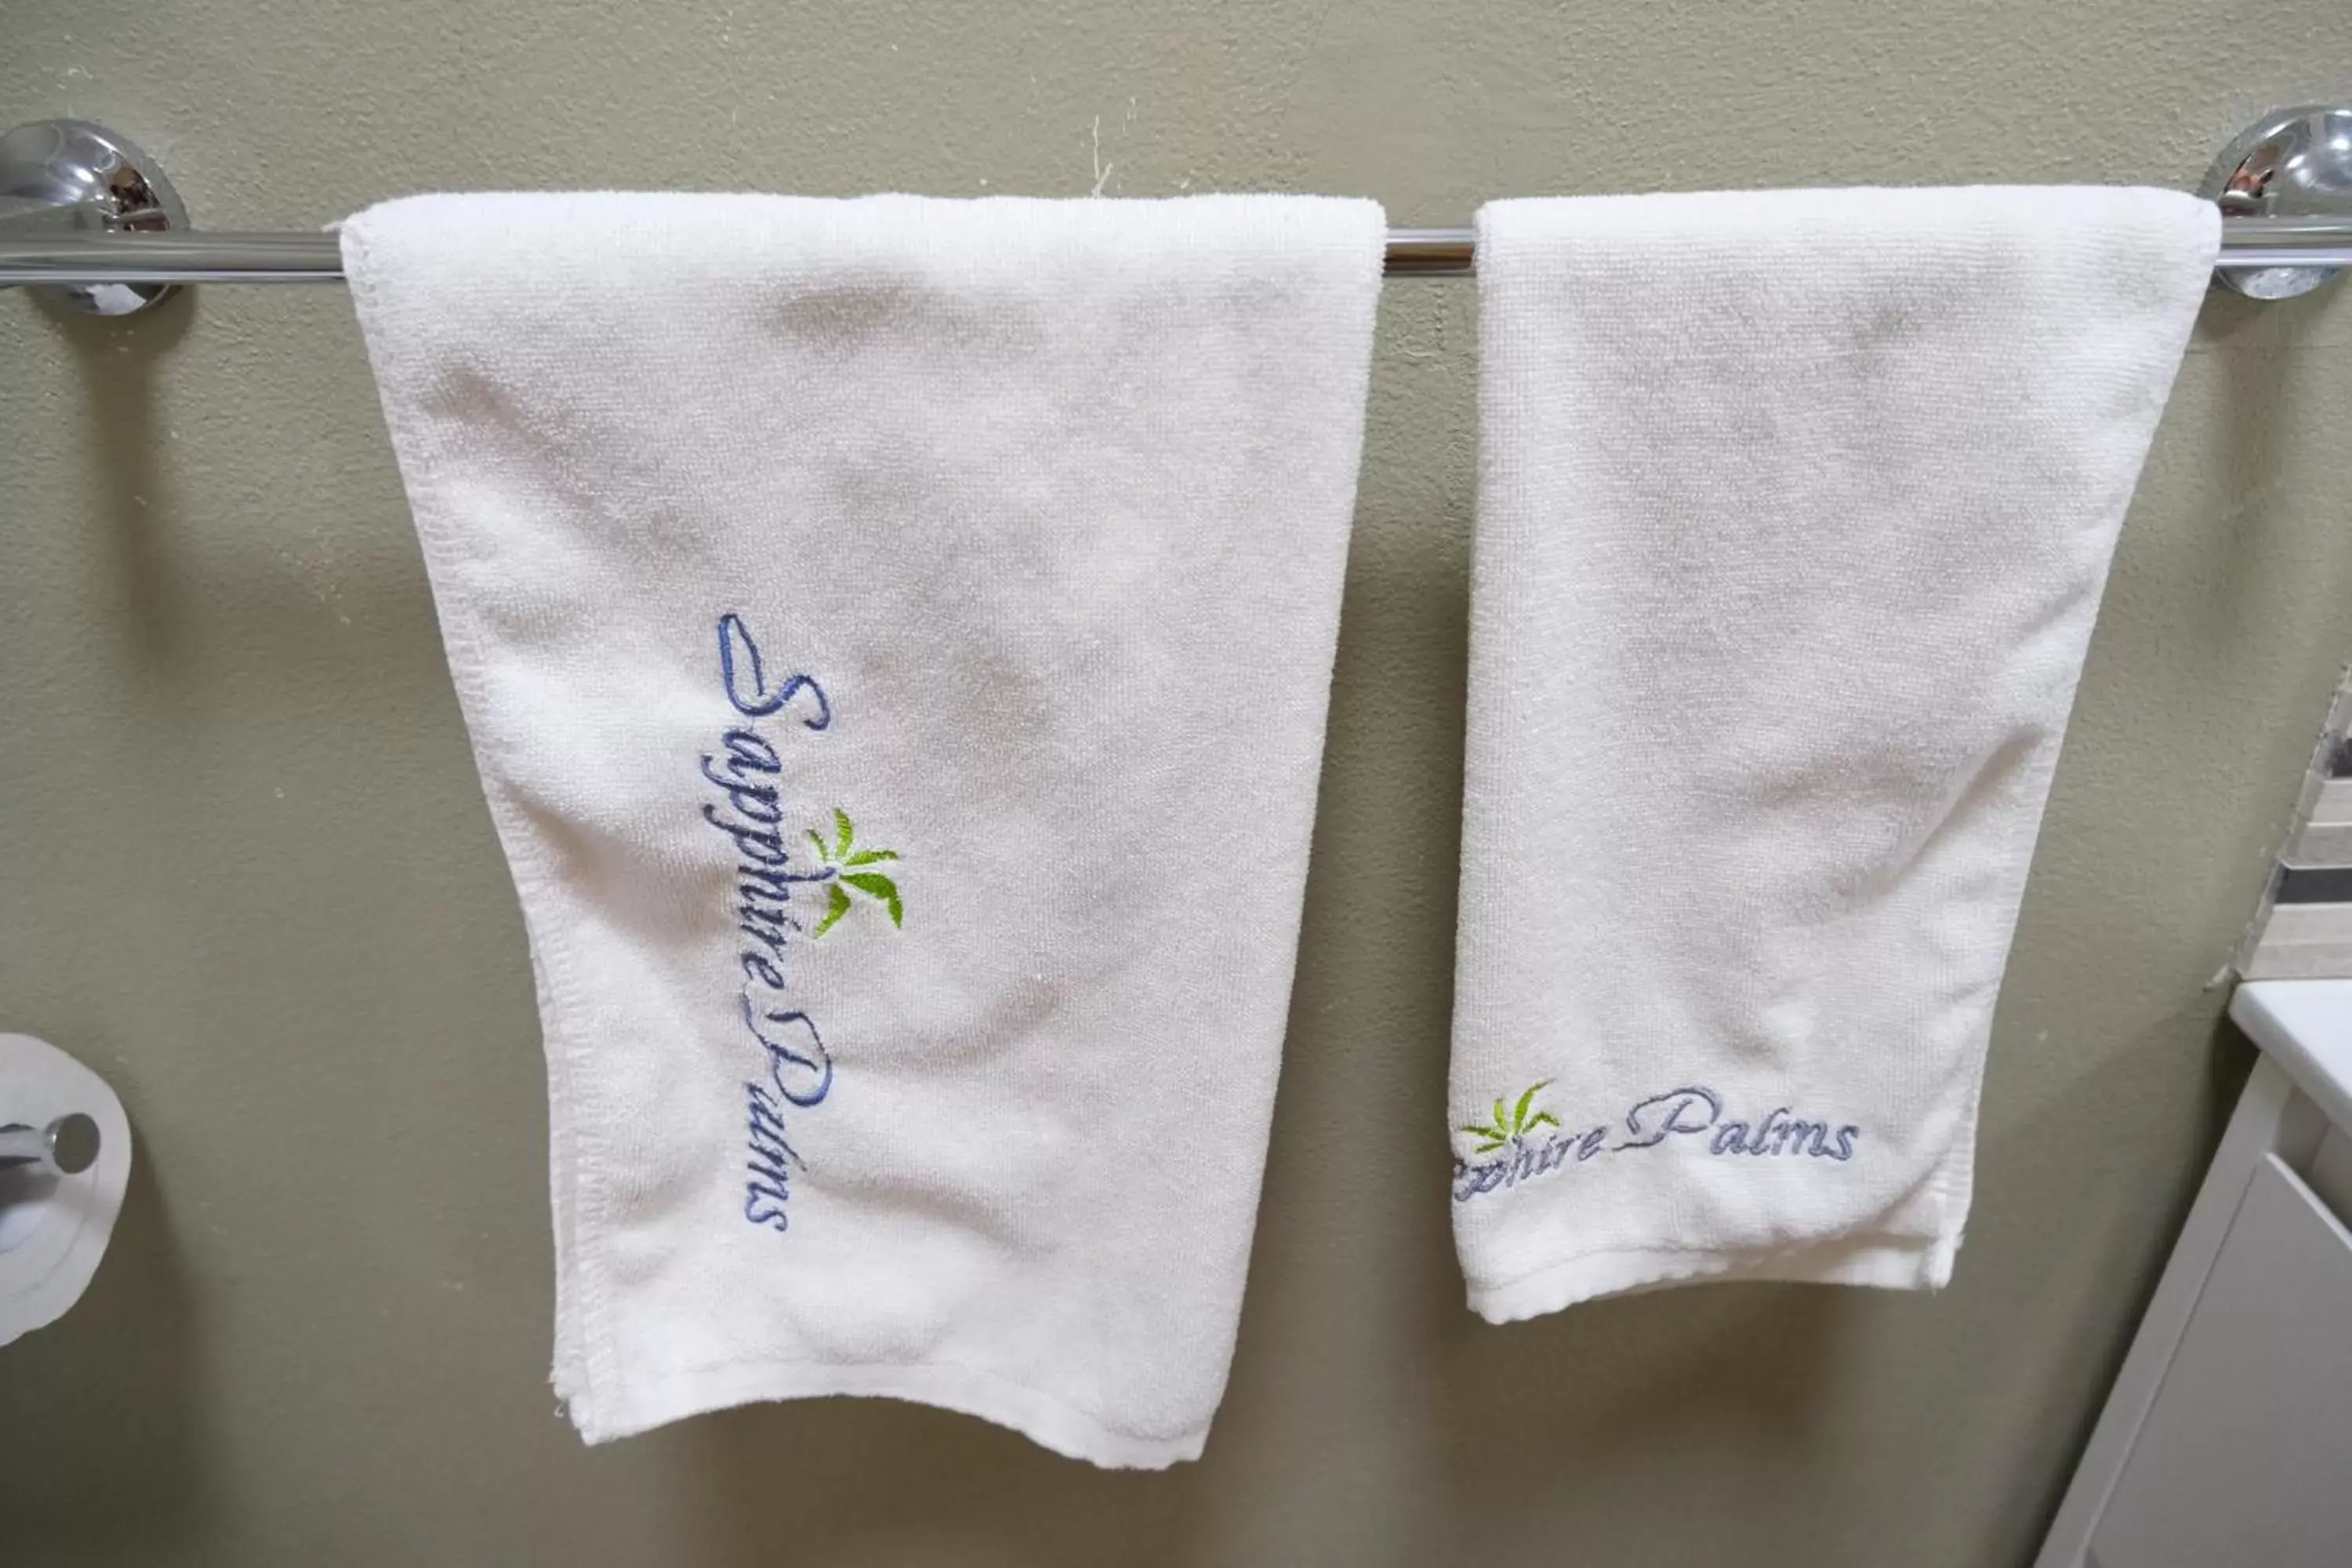 towels in Sapphire Palms Motel